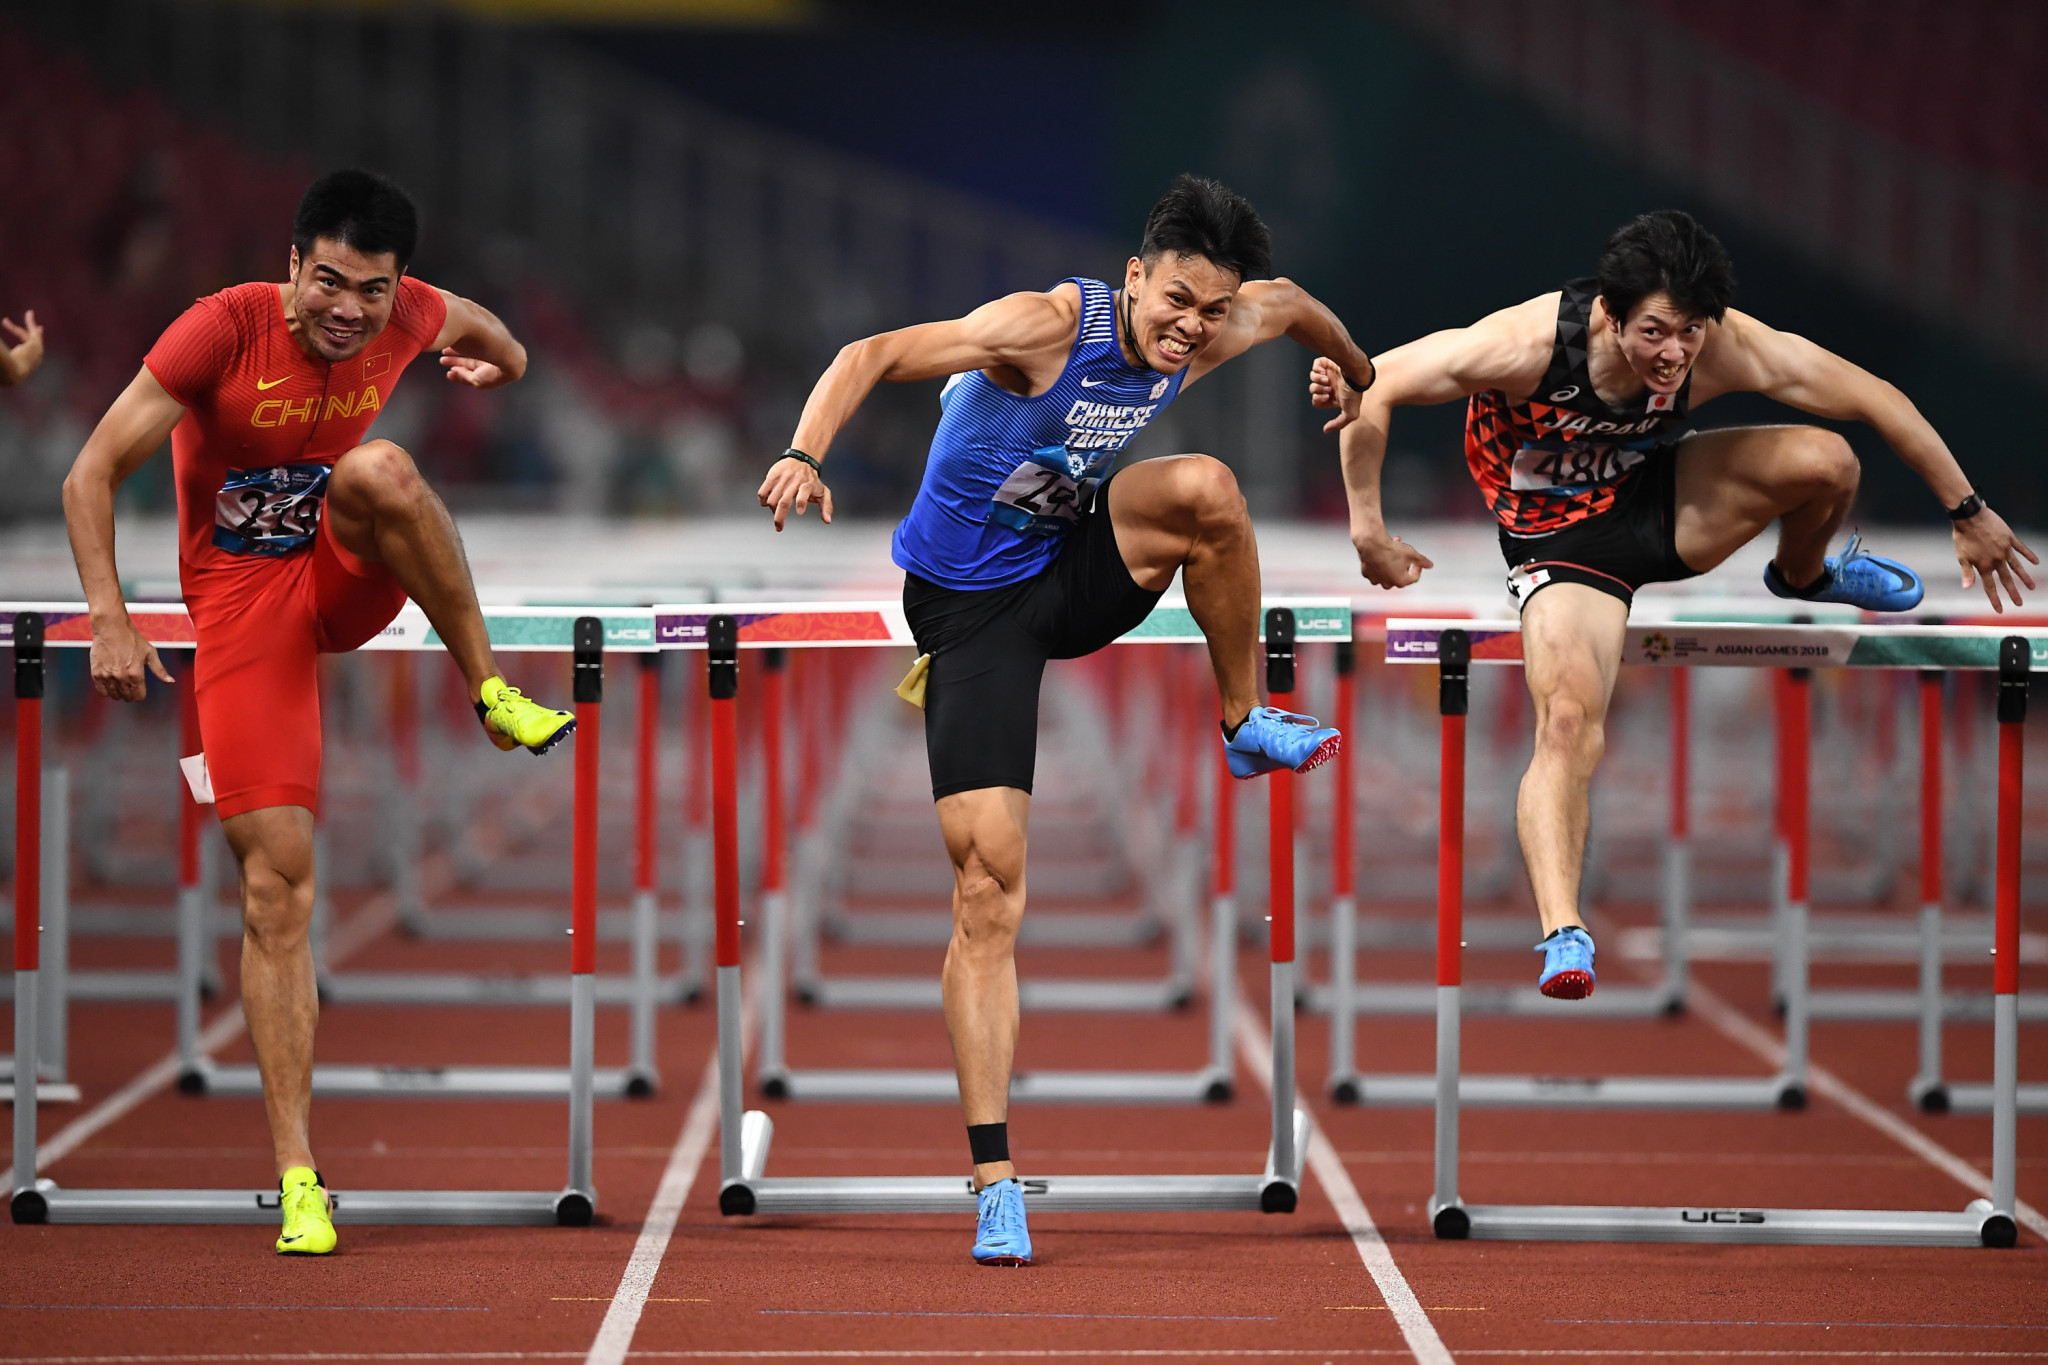 A Chinese athlete claimed the men’s 110 metres hurdles title for the ninth consecutive Asian Games thanks to the performance of Xie Wenjun ©Getty Images